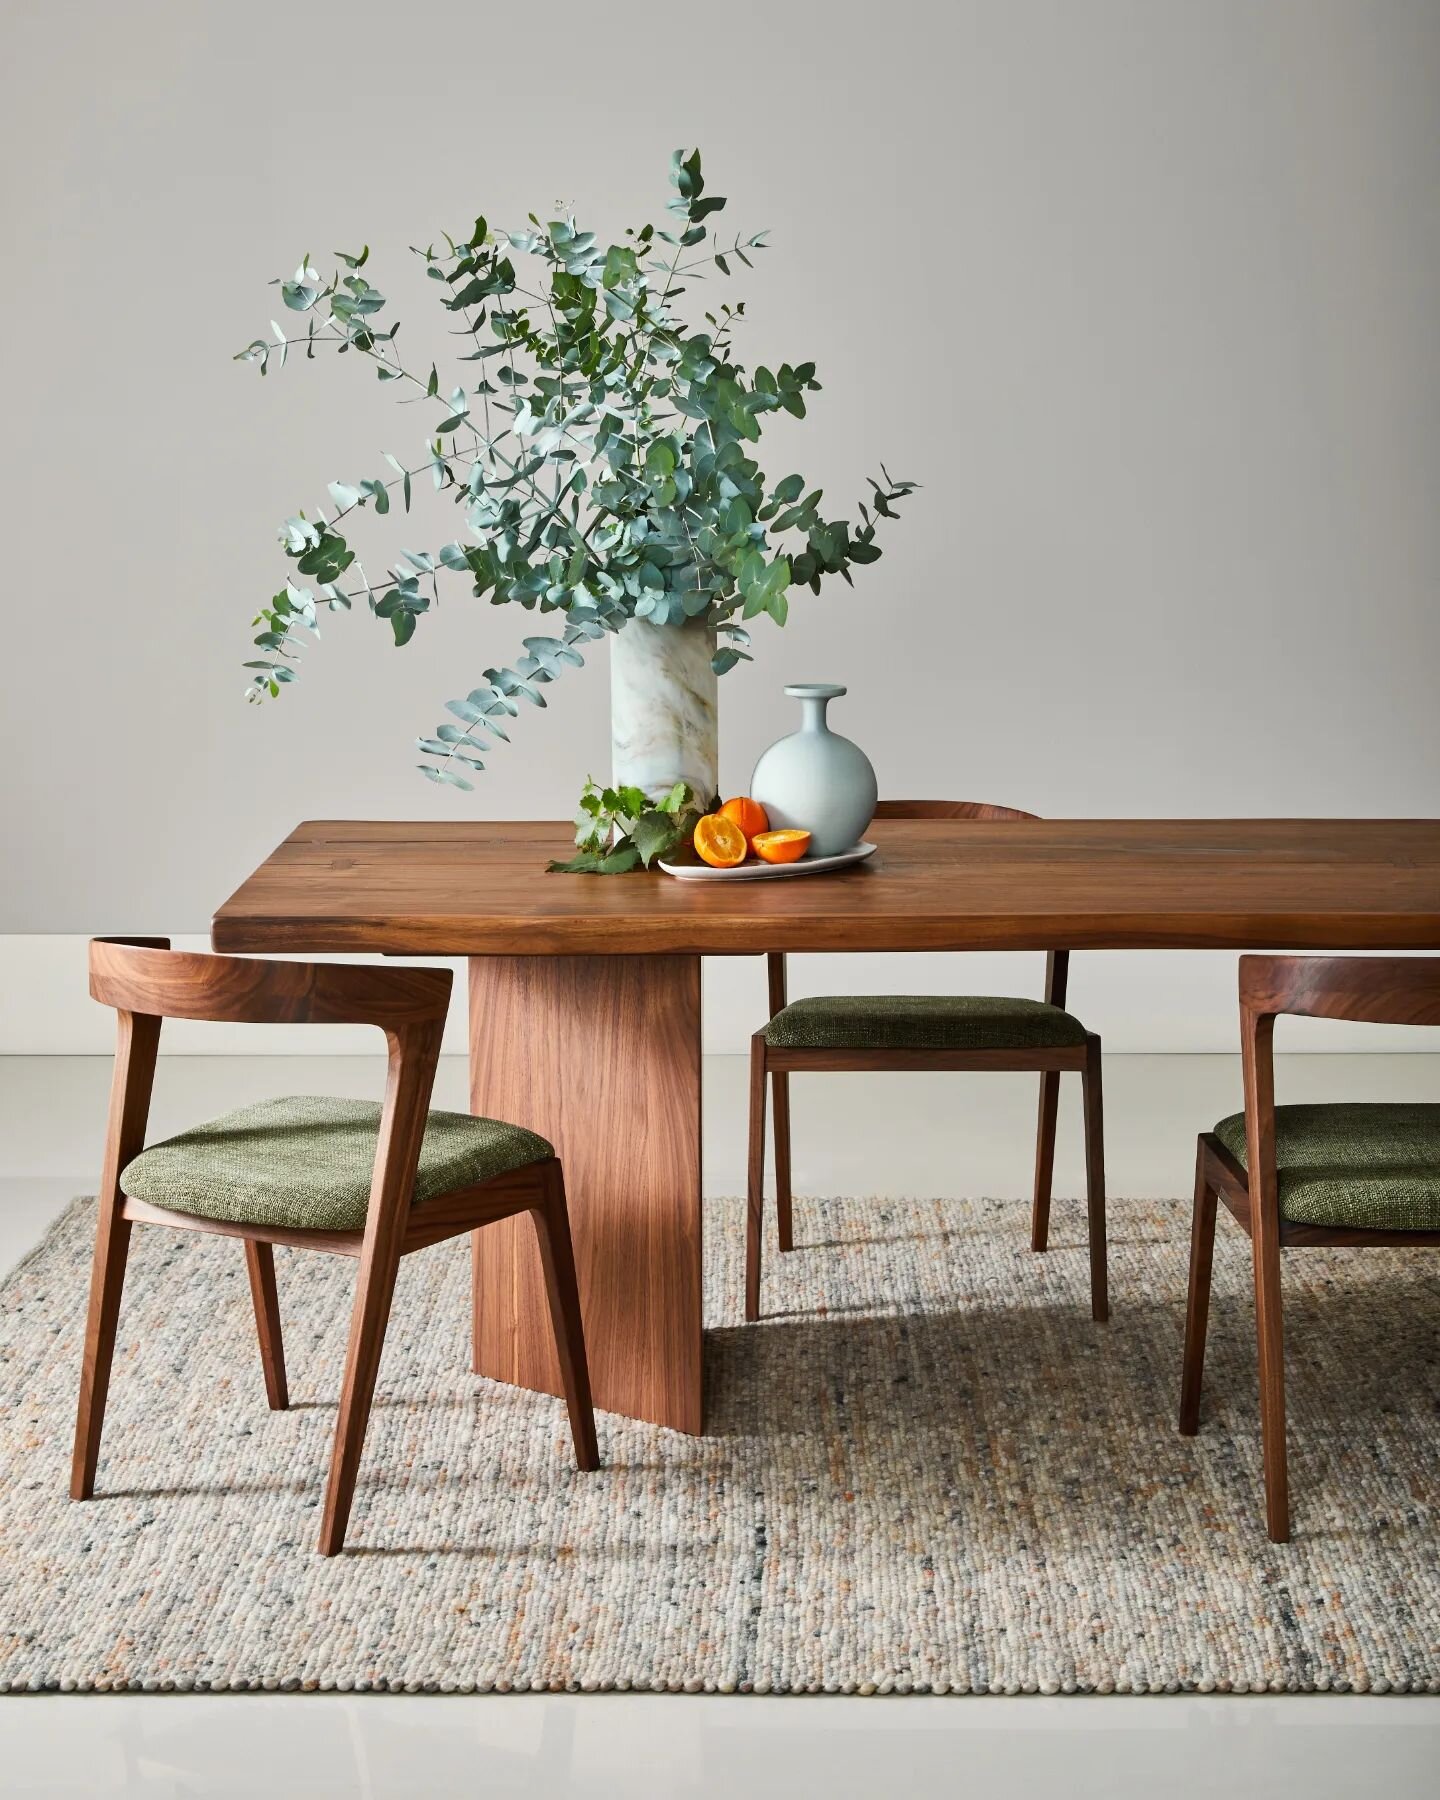 Italian designer @artebrotto Vero dining table shot for @domoaustralia Crafted from two twin planks of solid wood, carved from the same tree. Gorgeous detailing and angular table legs.
Photography by me x
Styled by @domoaustralia 
.
.
.
#furniture #i